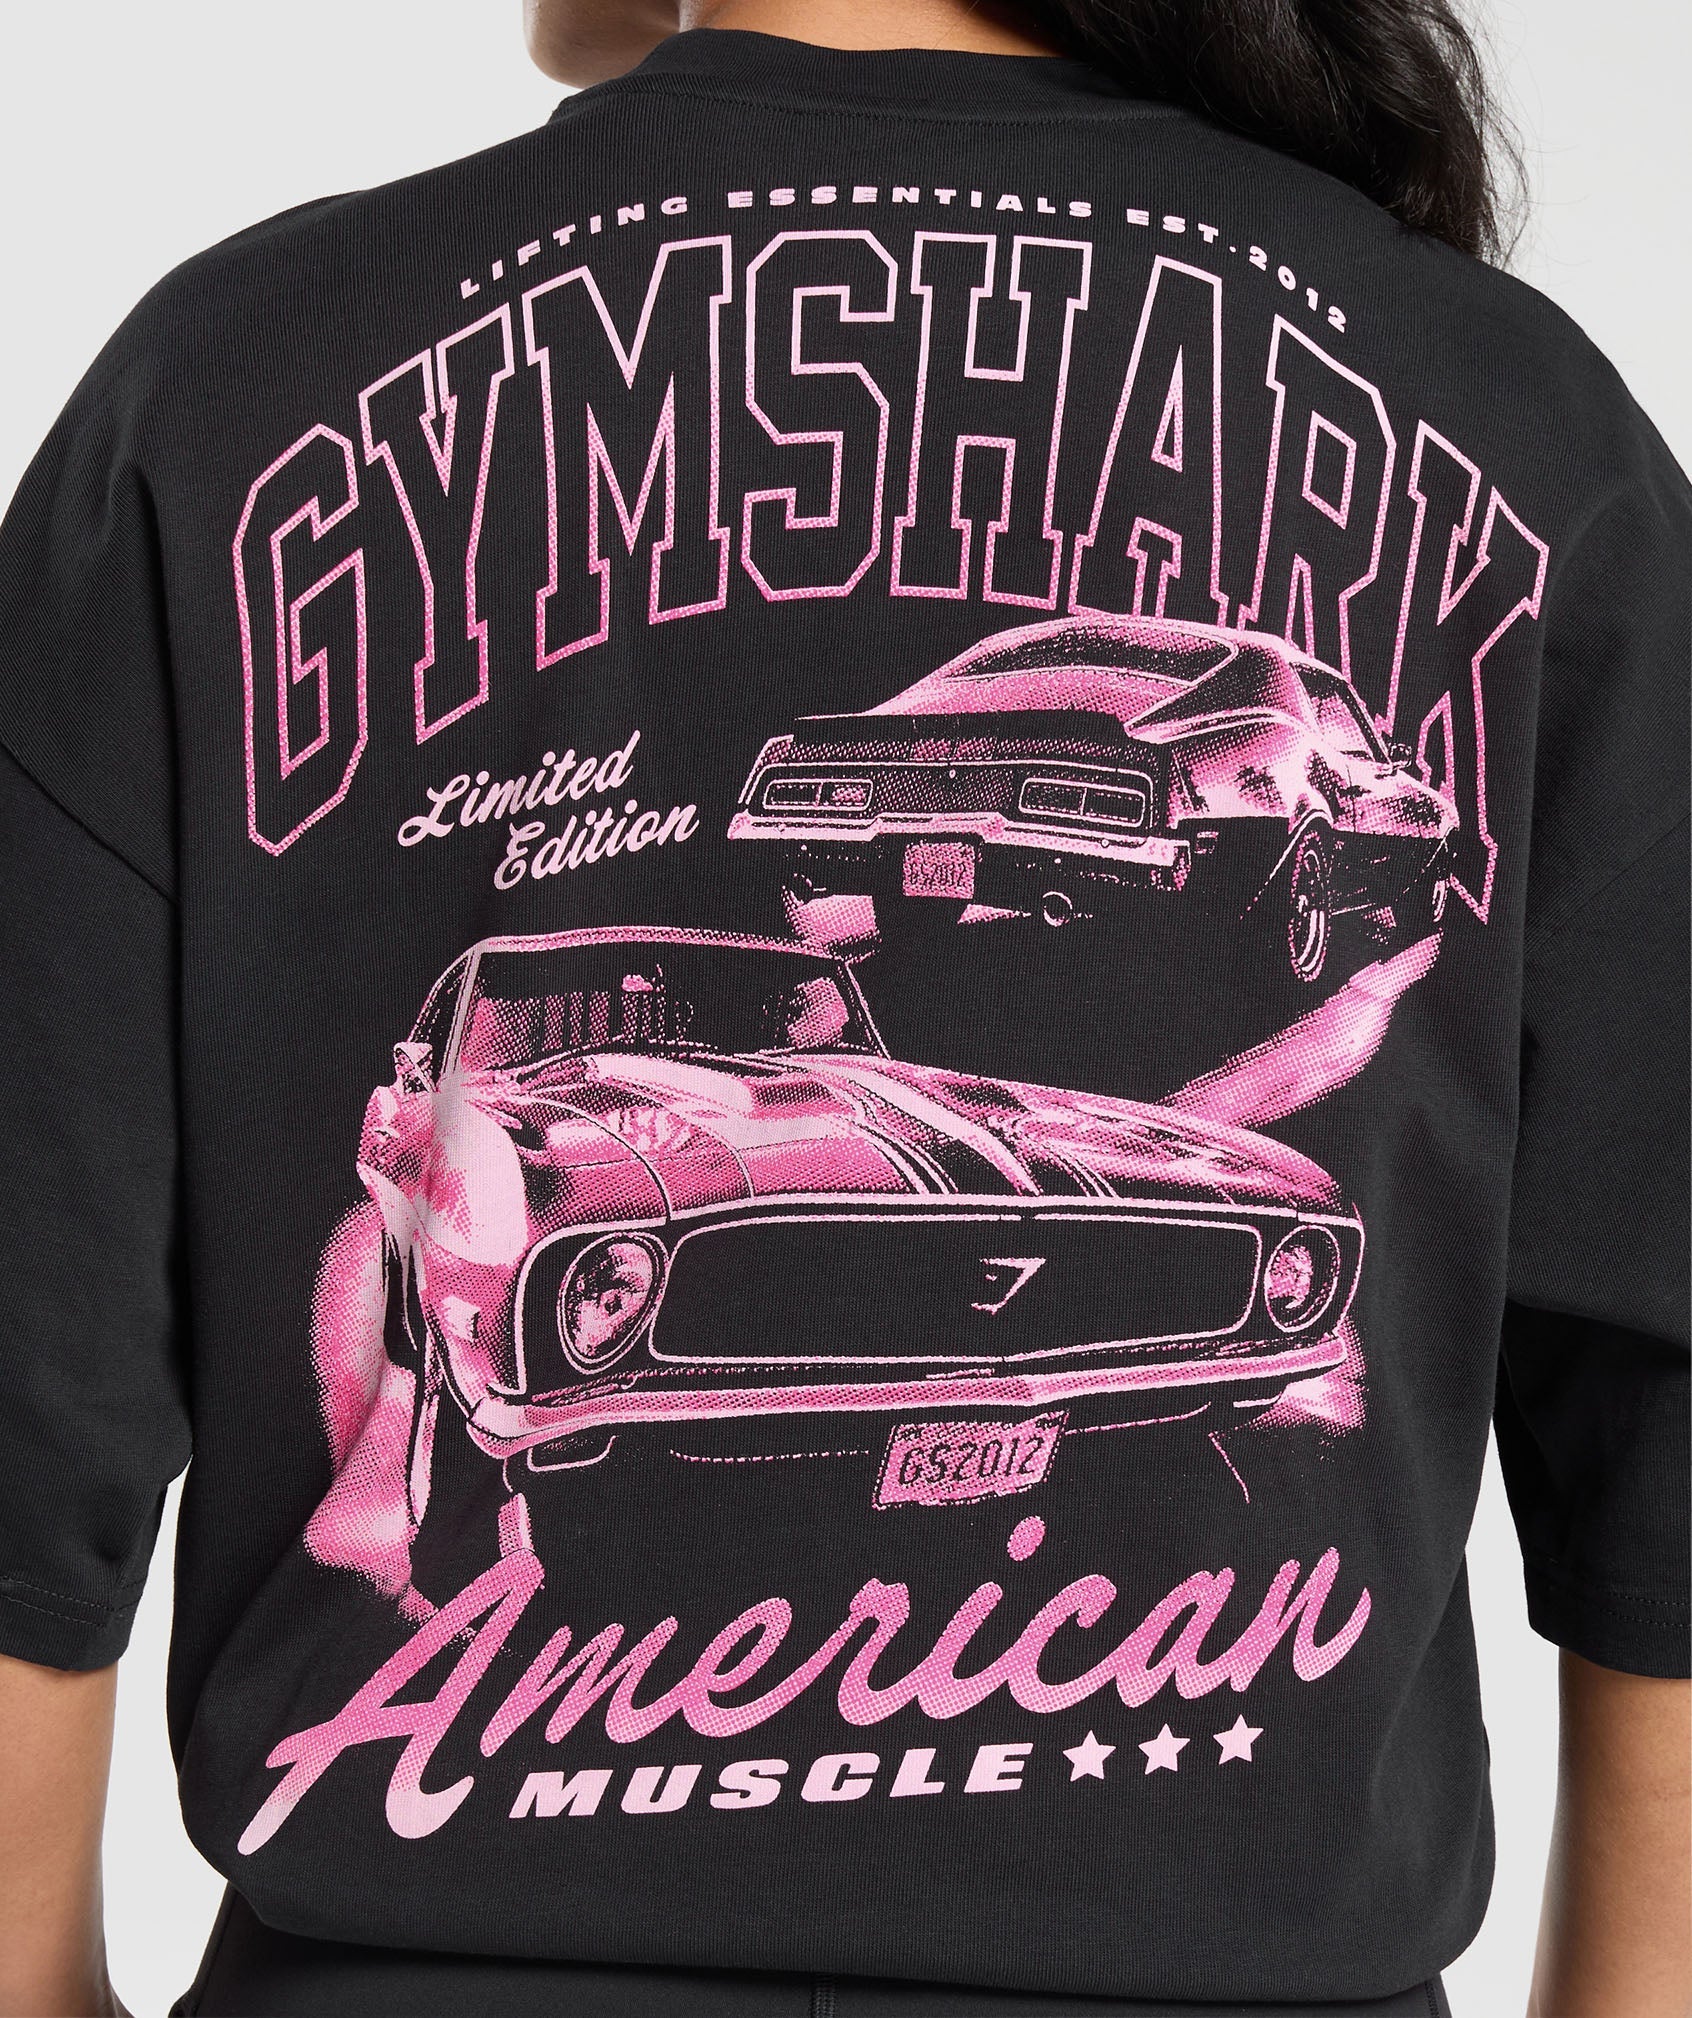 American Muscle Oversized T-Shirt in Black - view 5